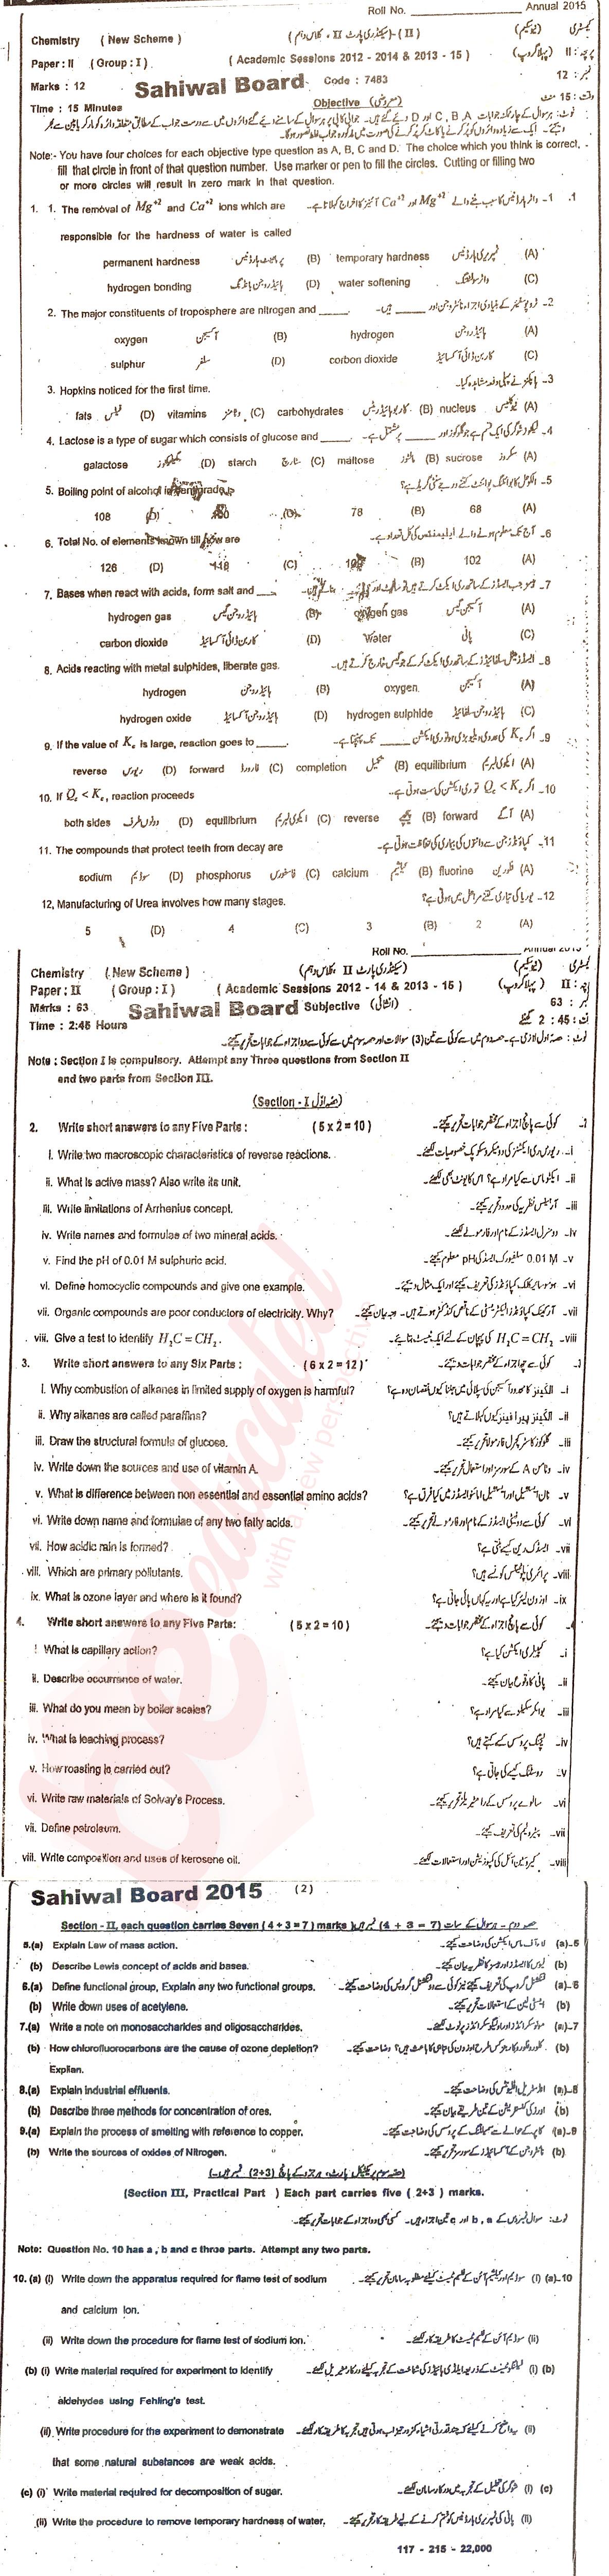 Chemistry 10th class Past Paper Group 1 BISE Sahiwal 2015